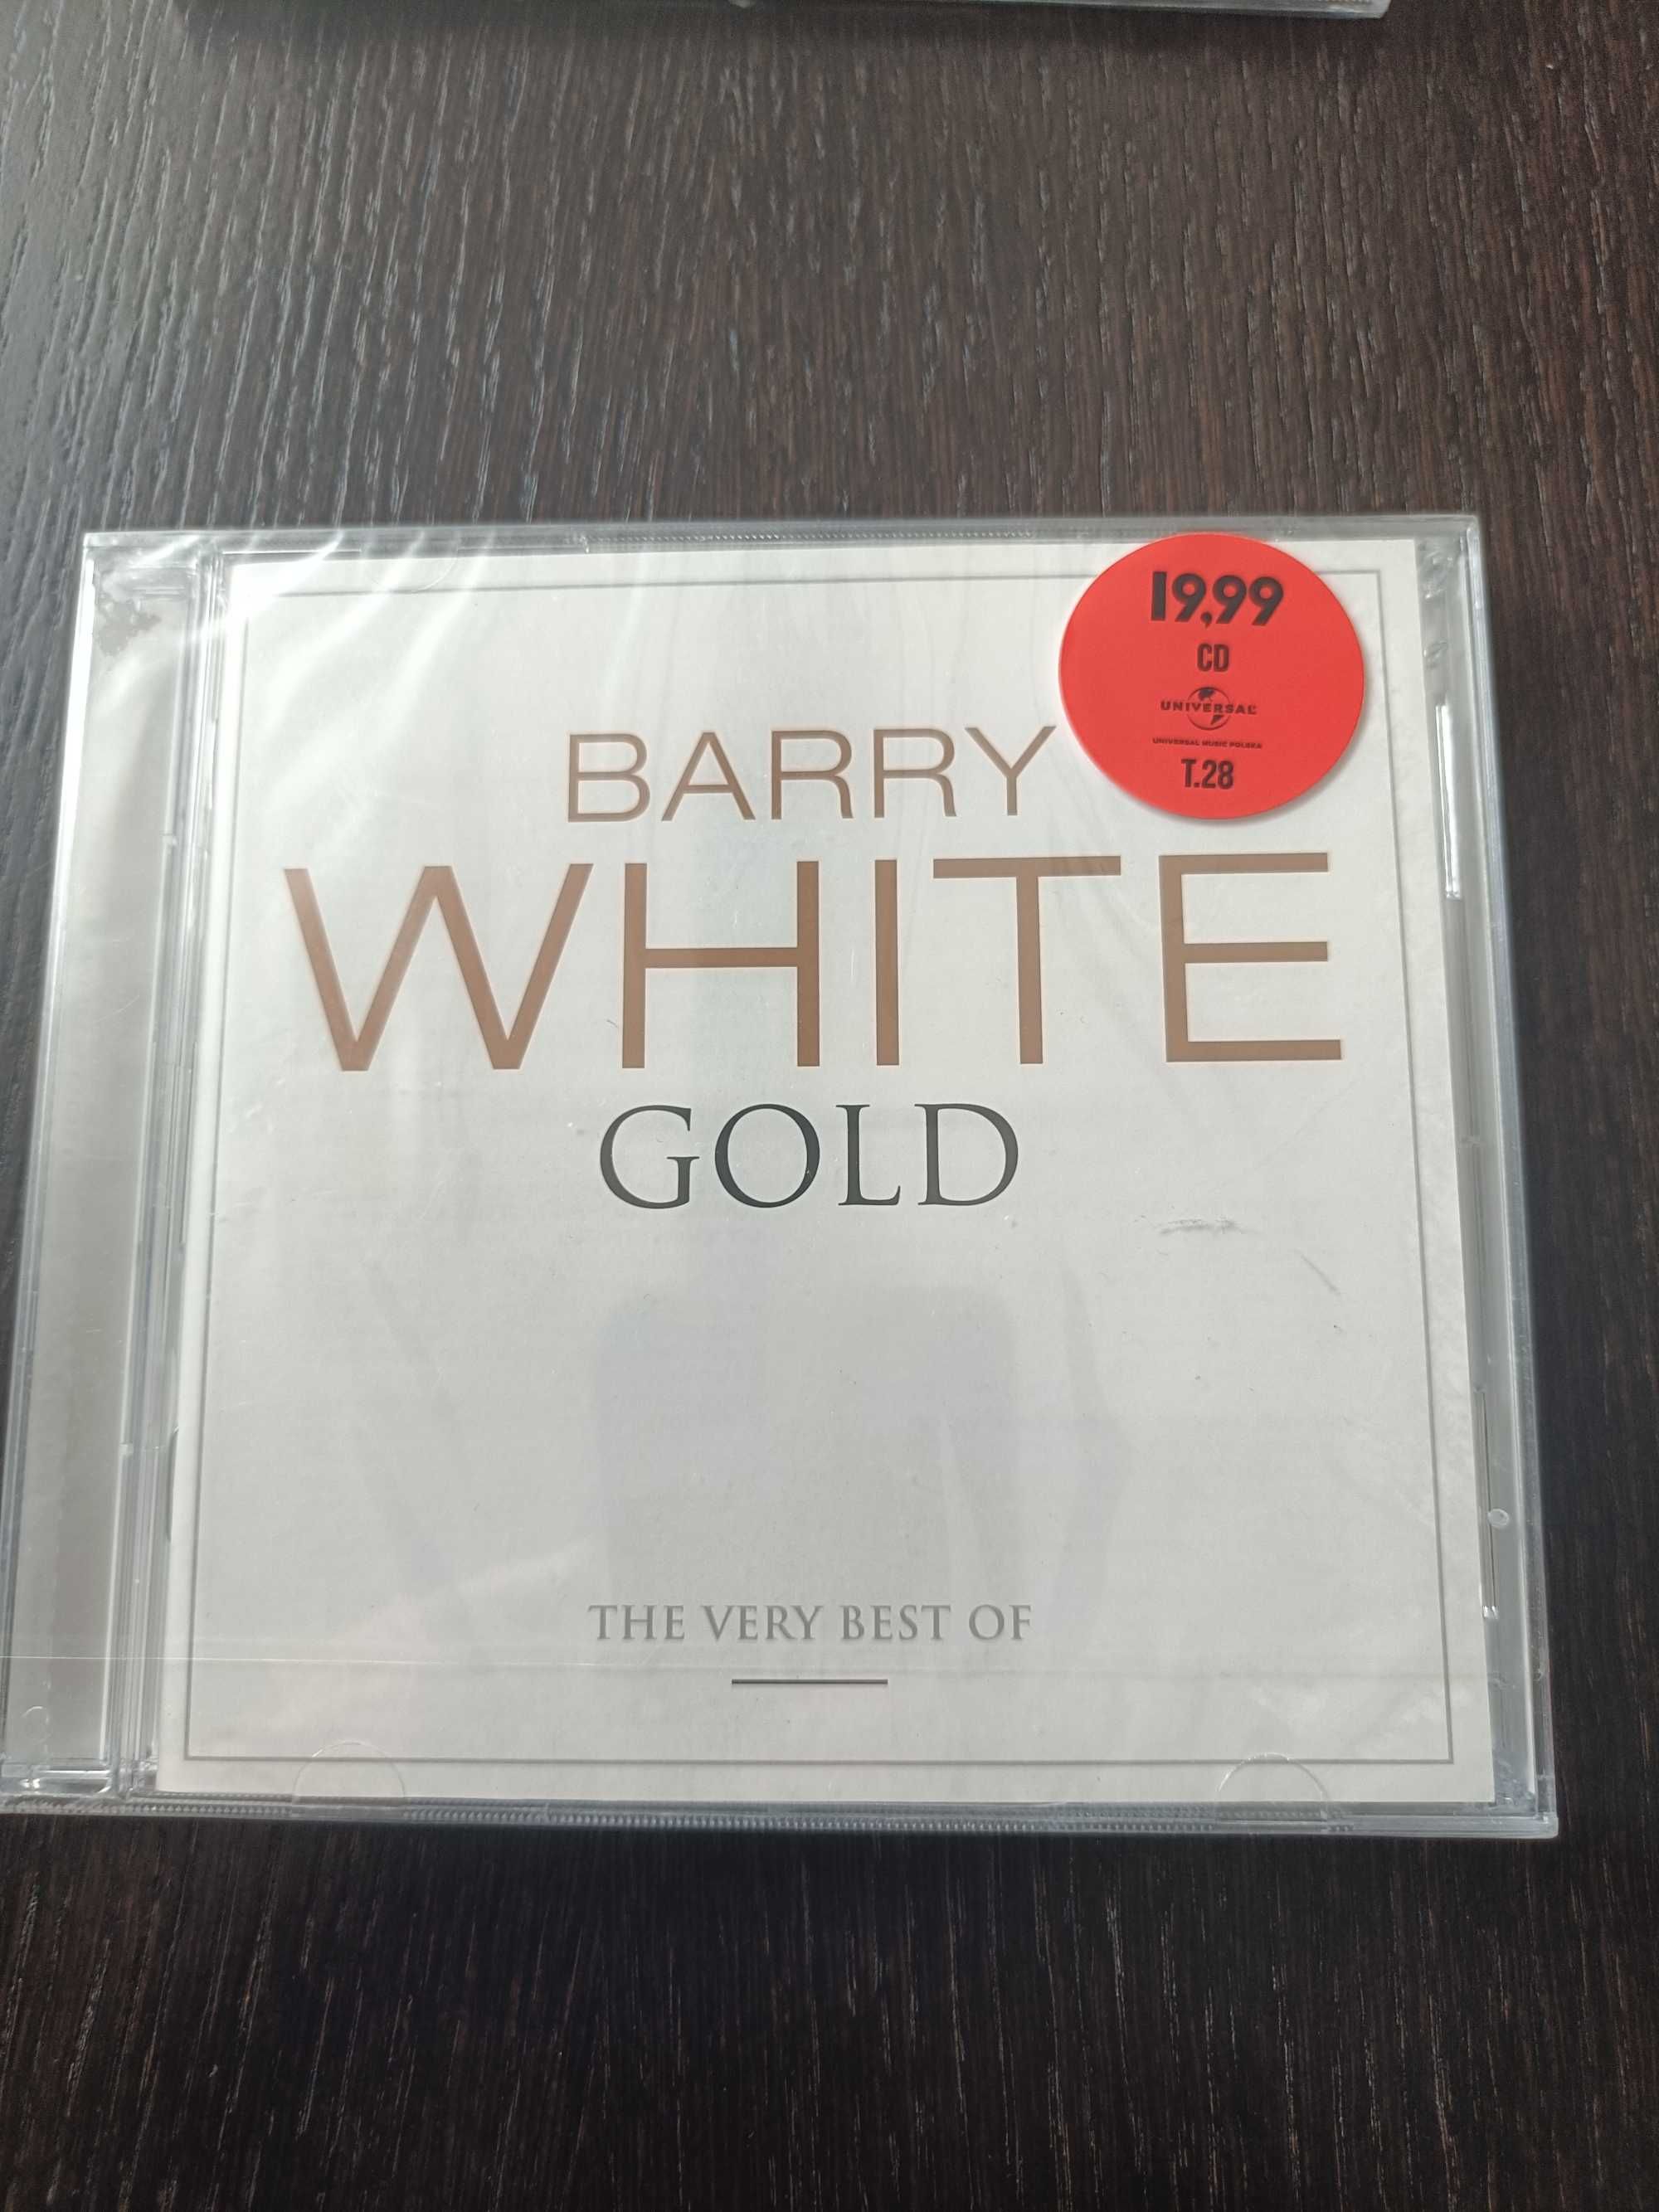 Barry white gold the very best of cd